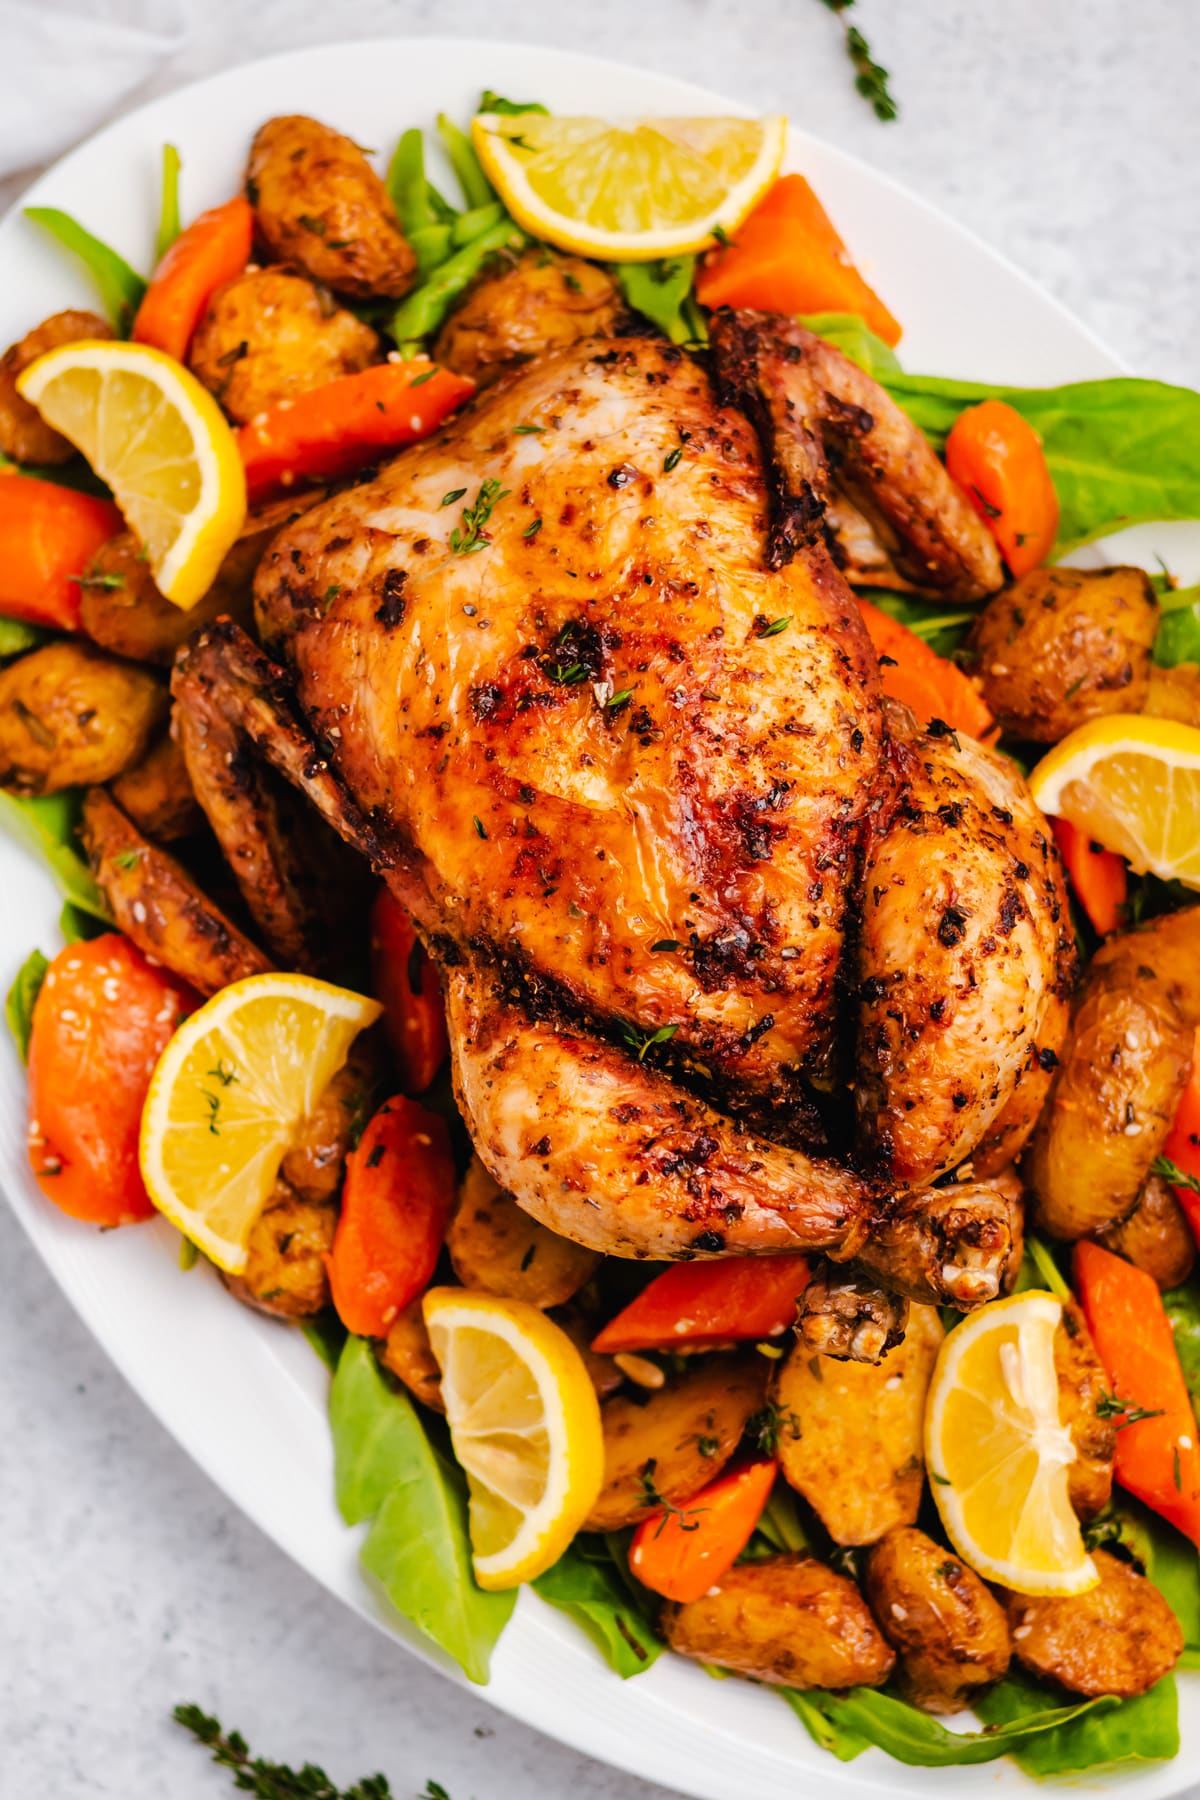 Low carb and gluten free air fryer cornish hen